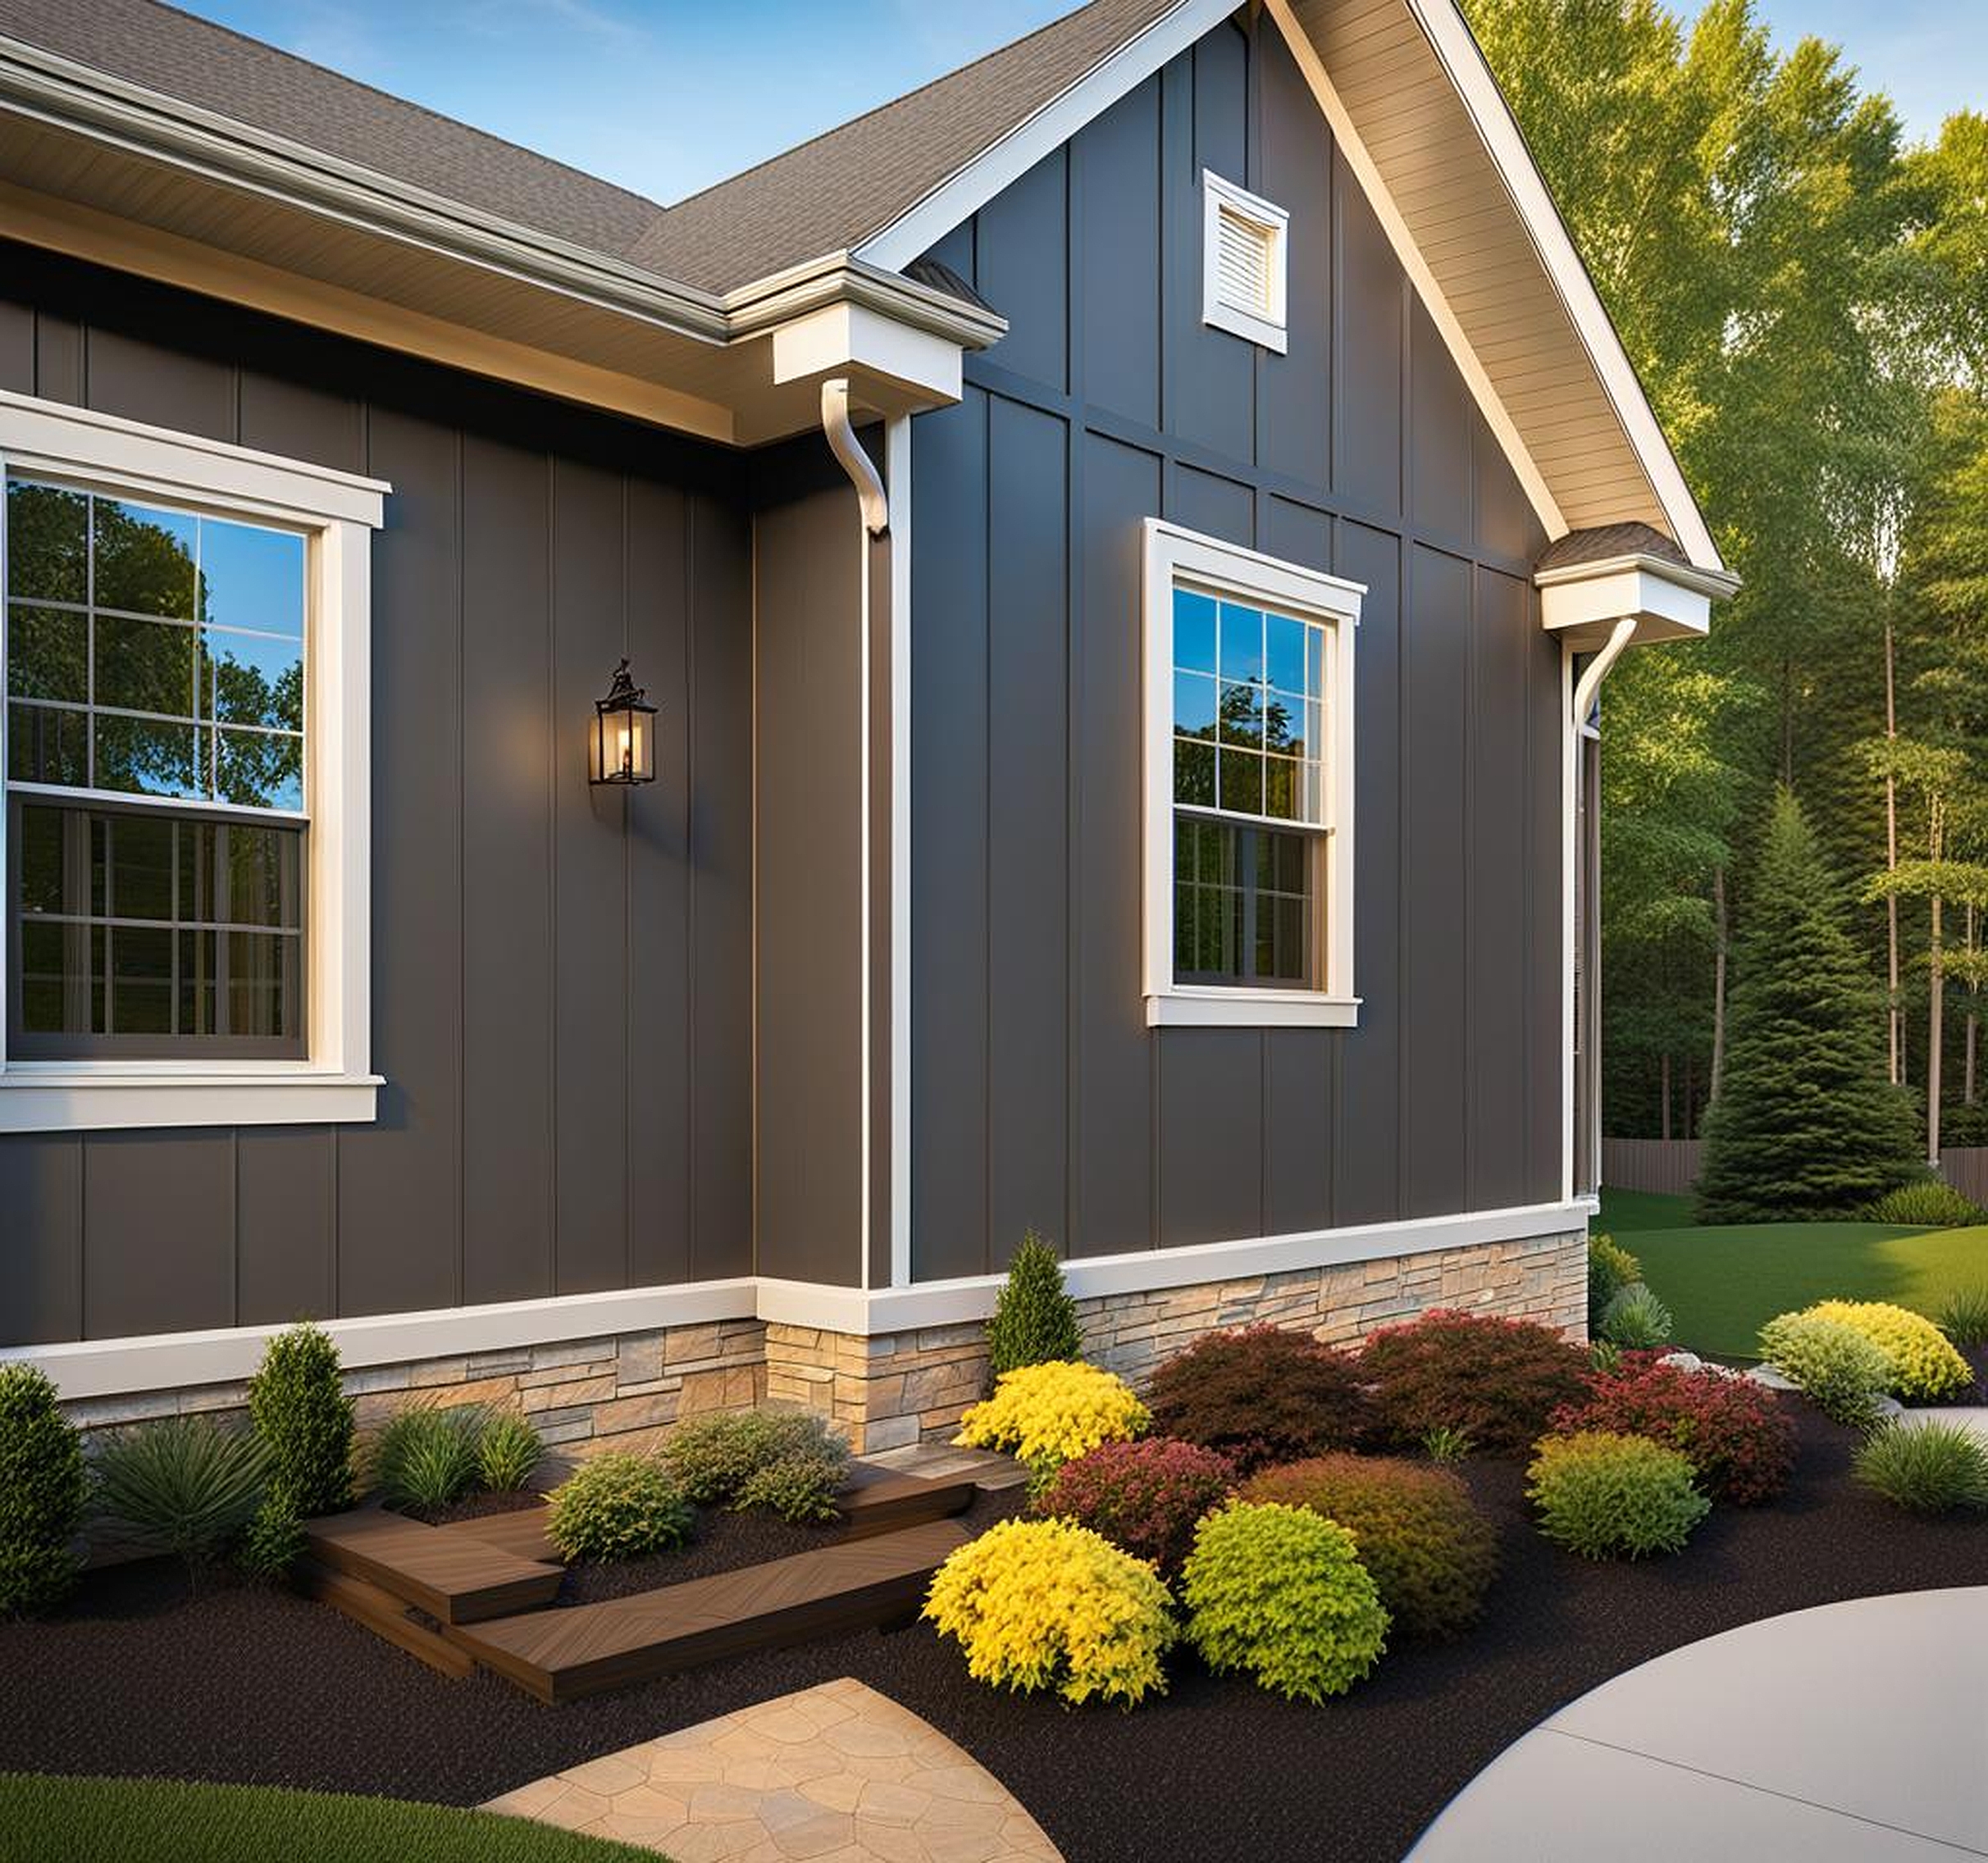 The Pros and Cons of Painting Vinyl Siding Darker for Exterior Use